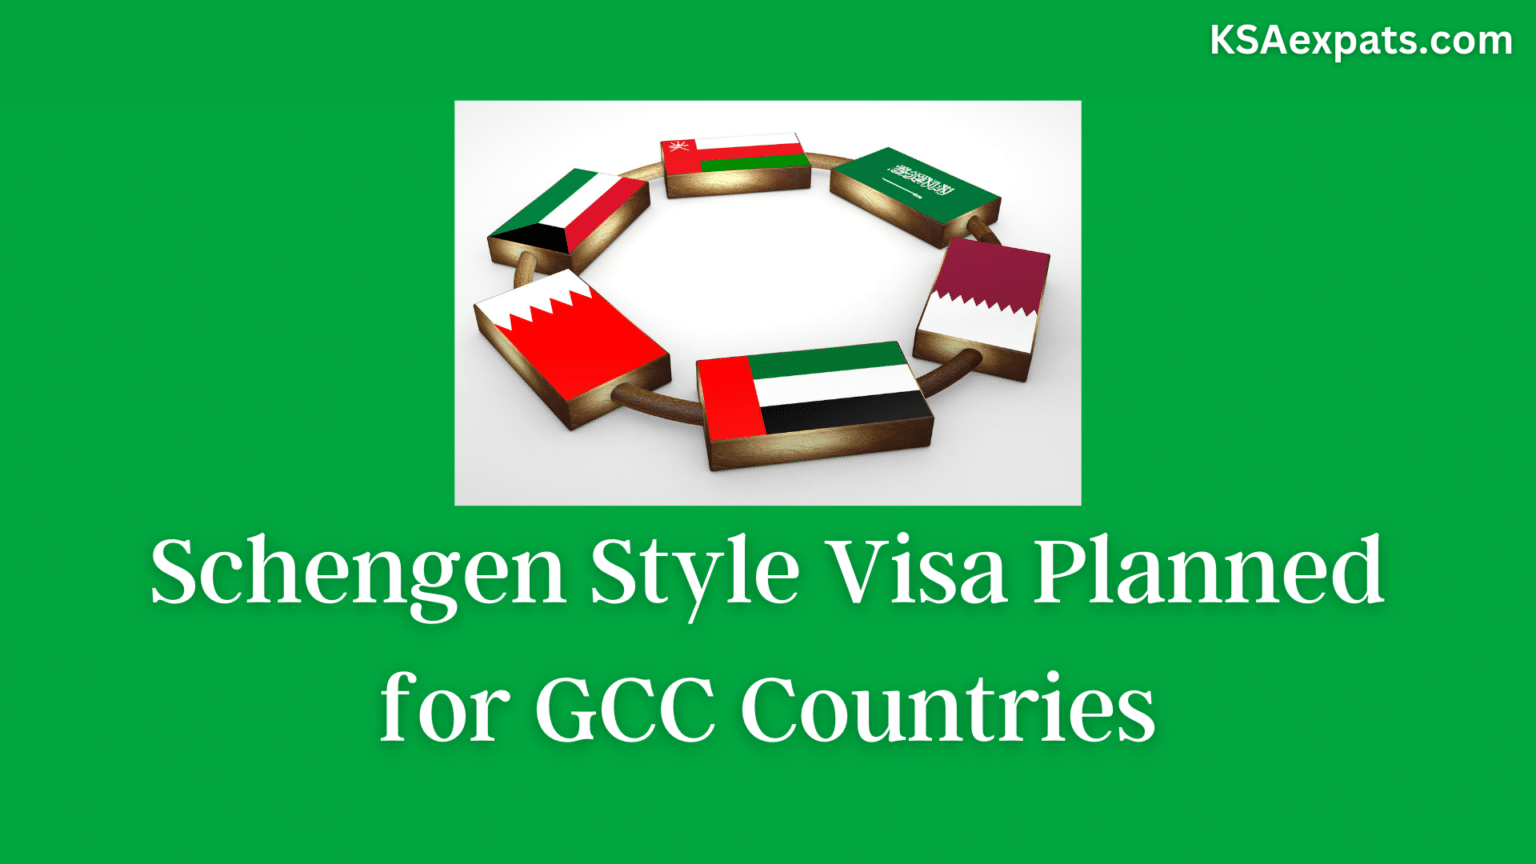 A SchengenStyle Visa for GCC Countries What It Means for Expatriates